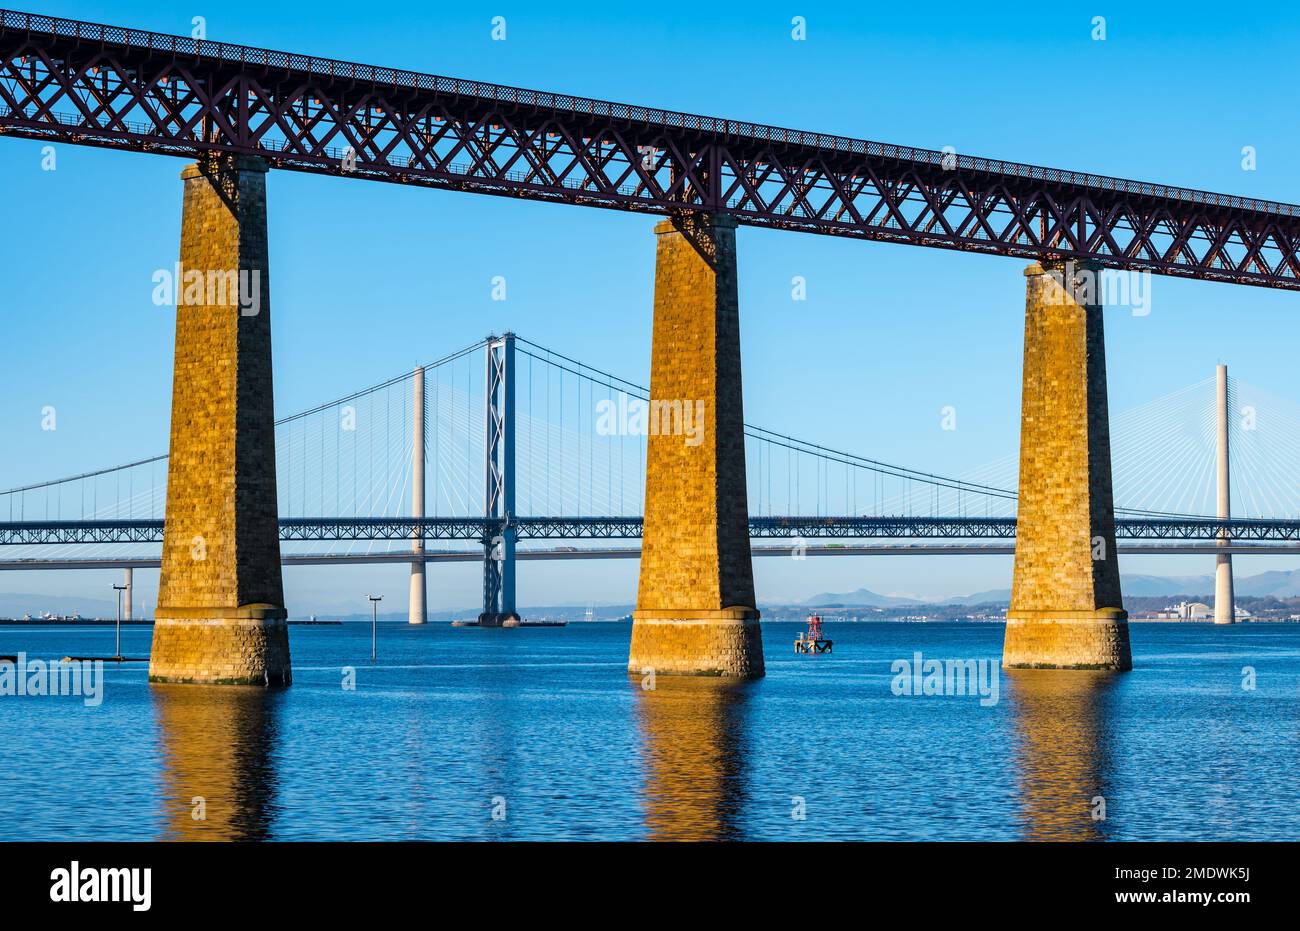 Forth bridges: Forth Rail bridge, Forth Road bridge and Queensferry Crossing on sunny day with clear blue sky, Firth of Forth, Scotland, UK Stock Photo